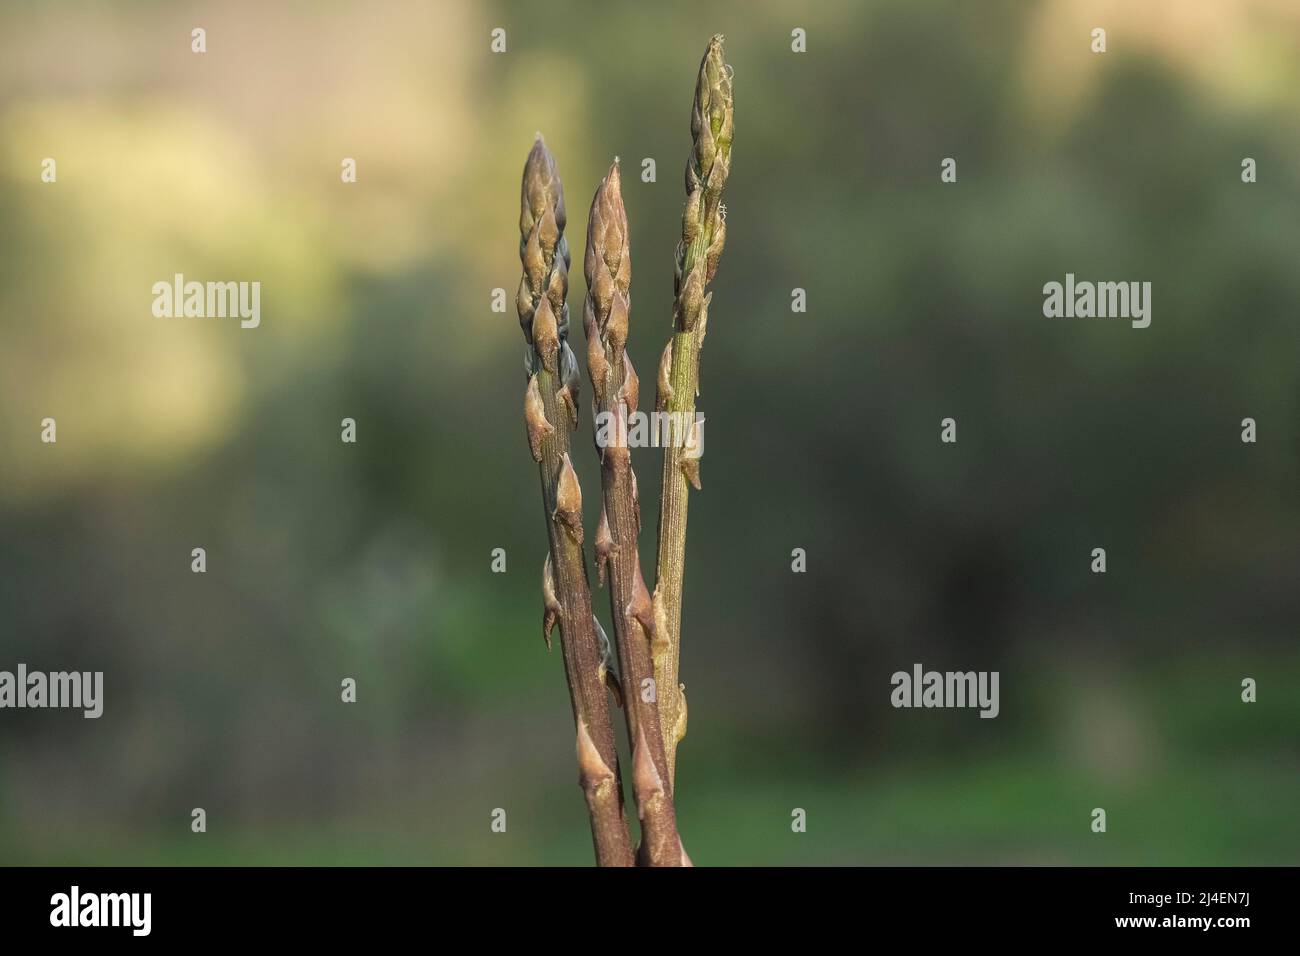 Isolated wild italian asparagus over natural blurred backgorund,genuine raw healthy food Stock Photo